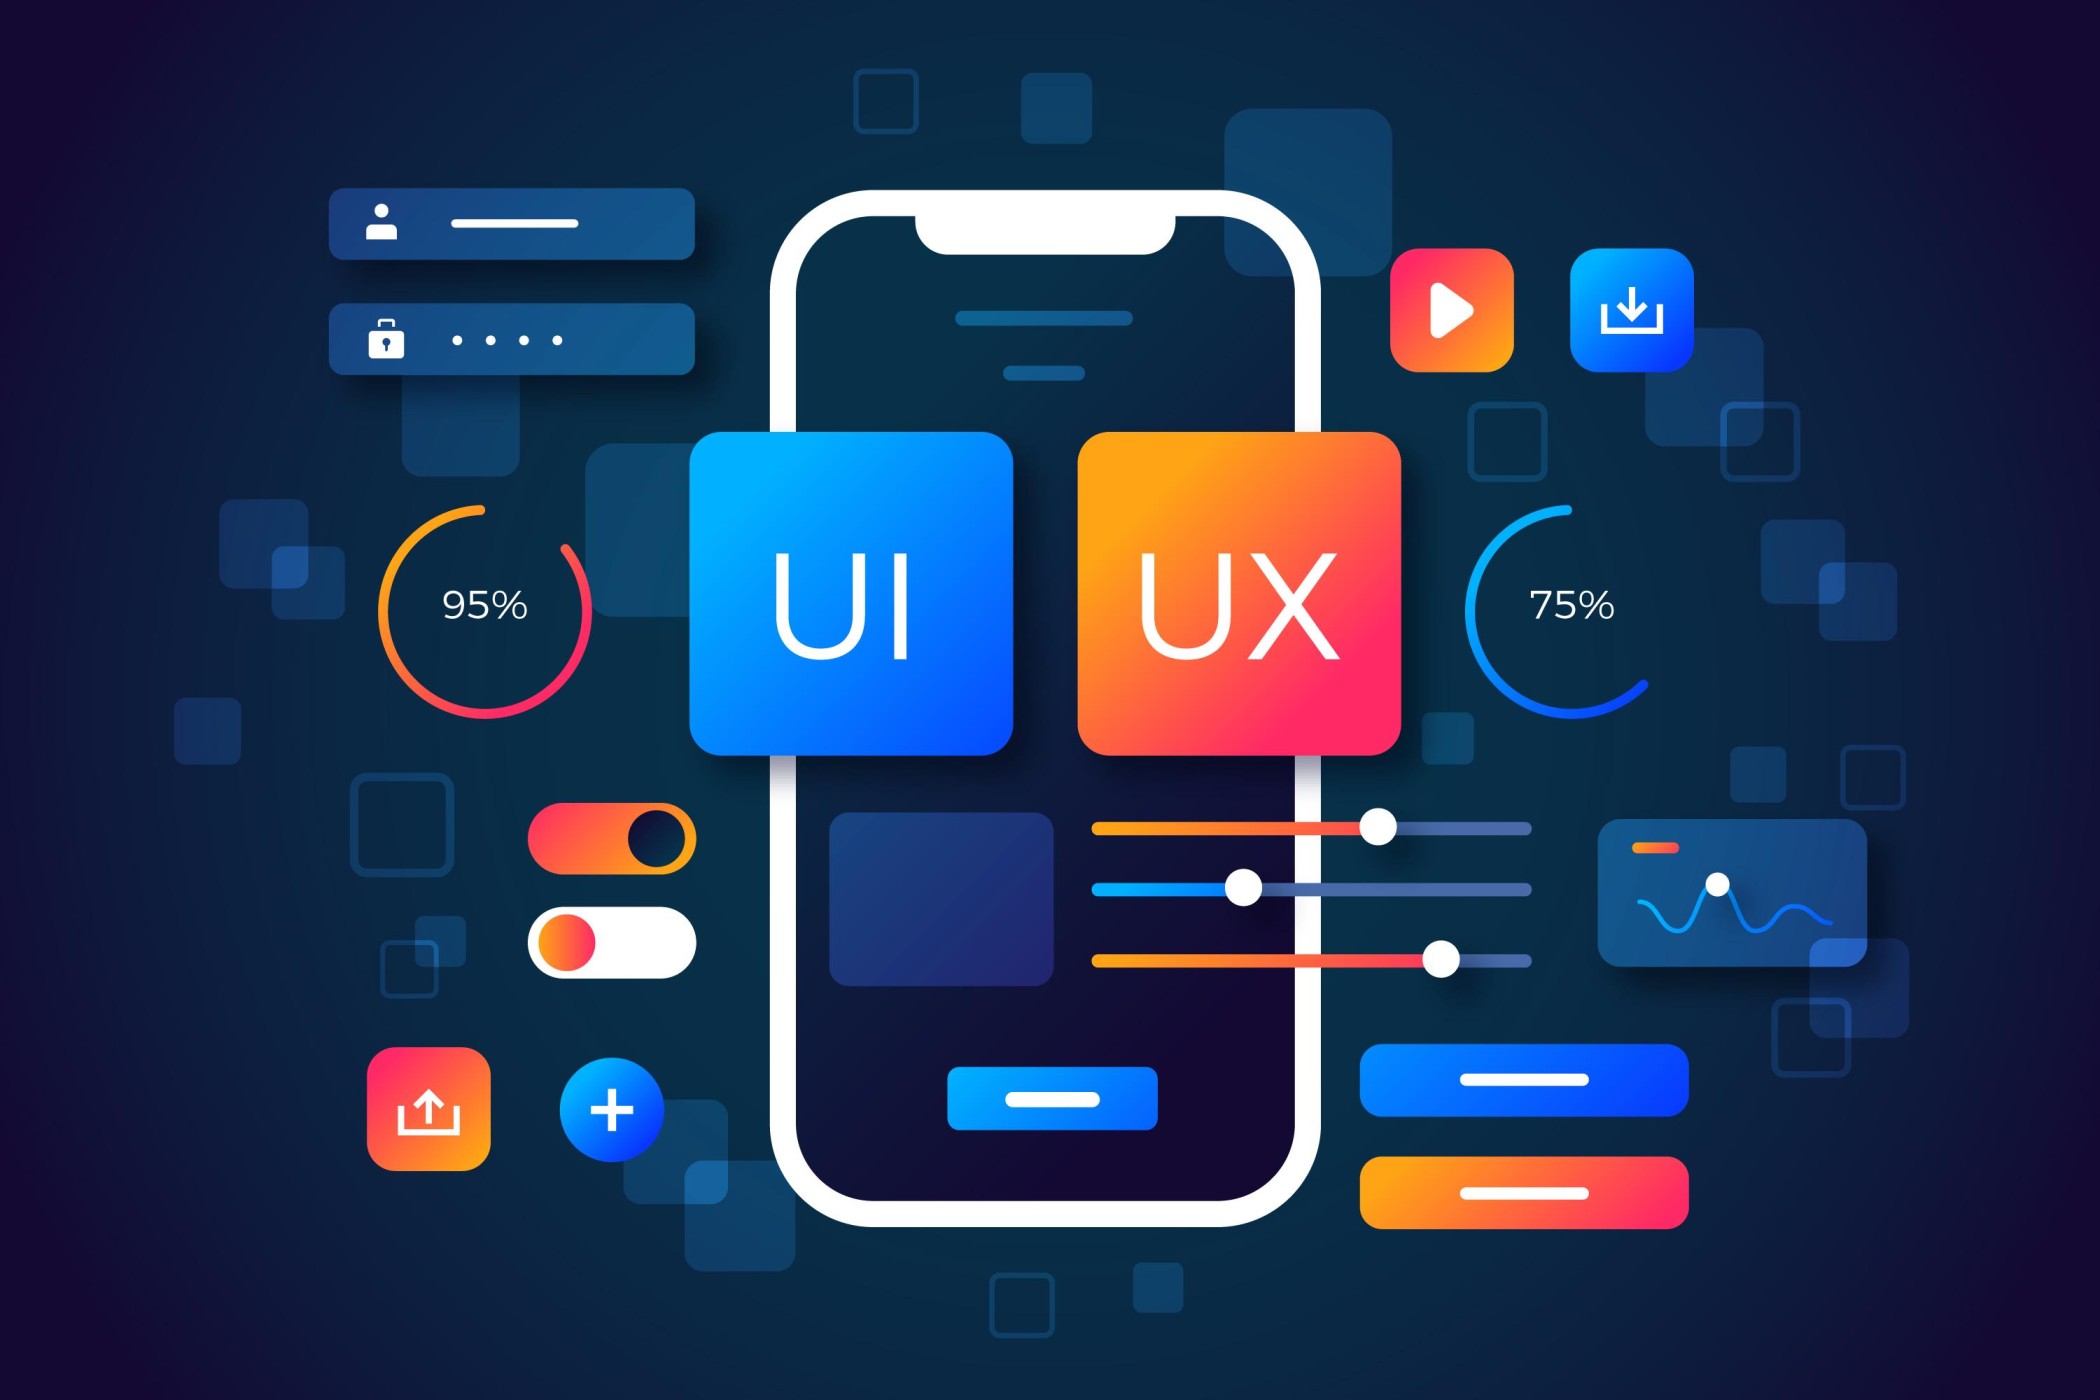 Key Differences Between UI vs UX